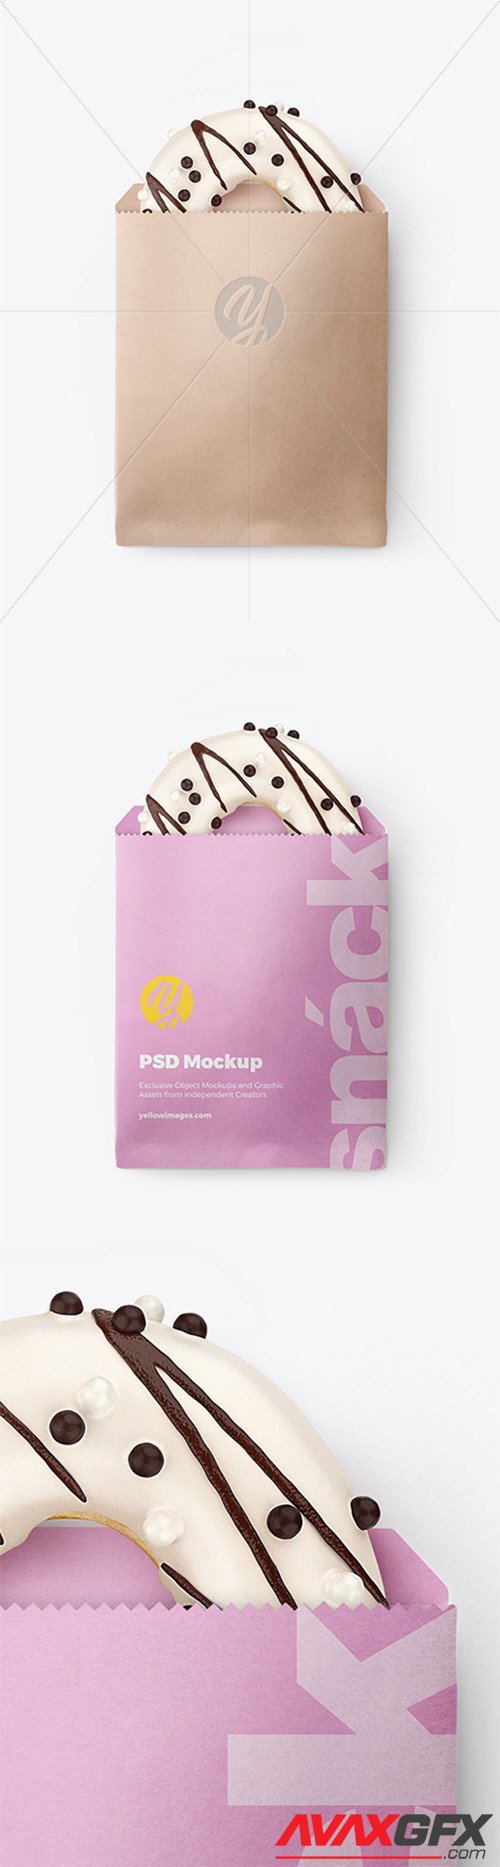 Download Yellowimages Mockups Glossy Paper Cement Bag Psd Mockup Png PSD Mockup Templates